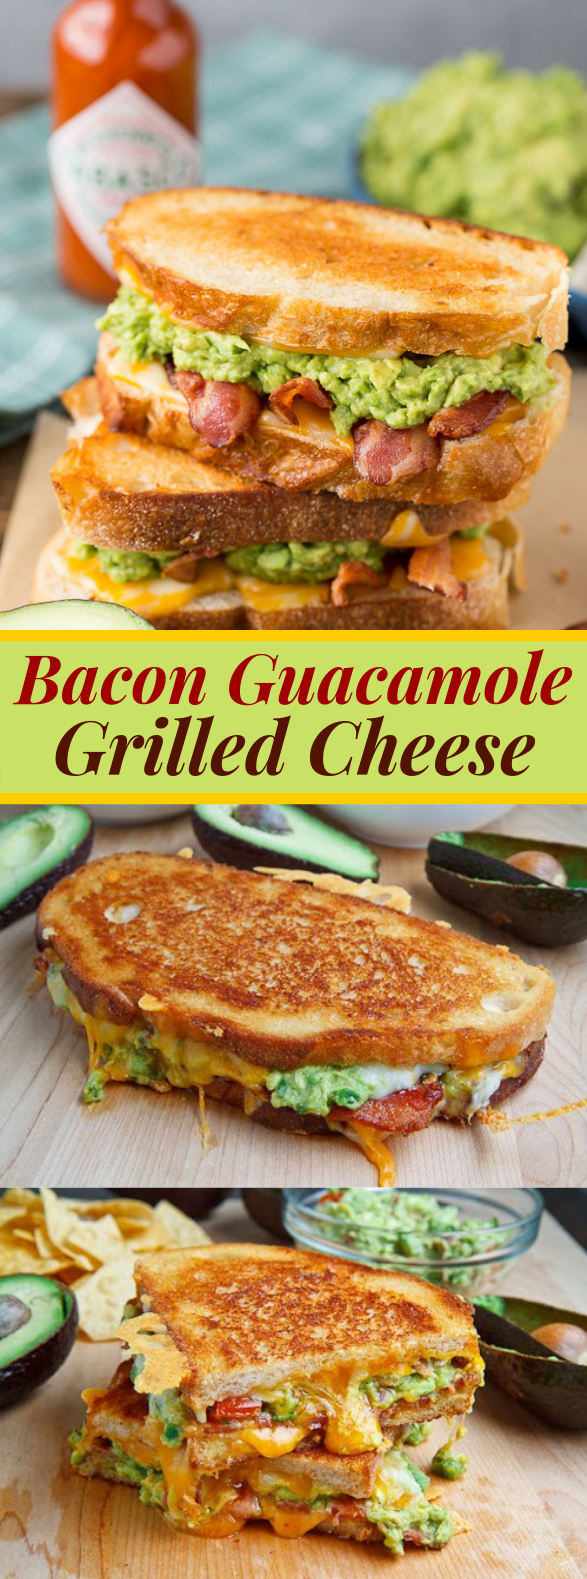 Bacon Guacamole Grilled Cheese Sandwich #meal #lunch